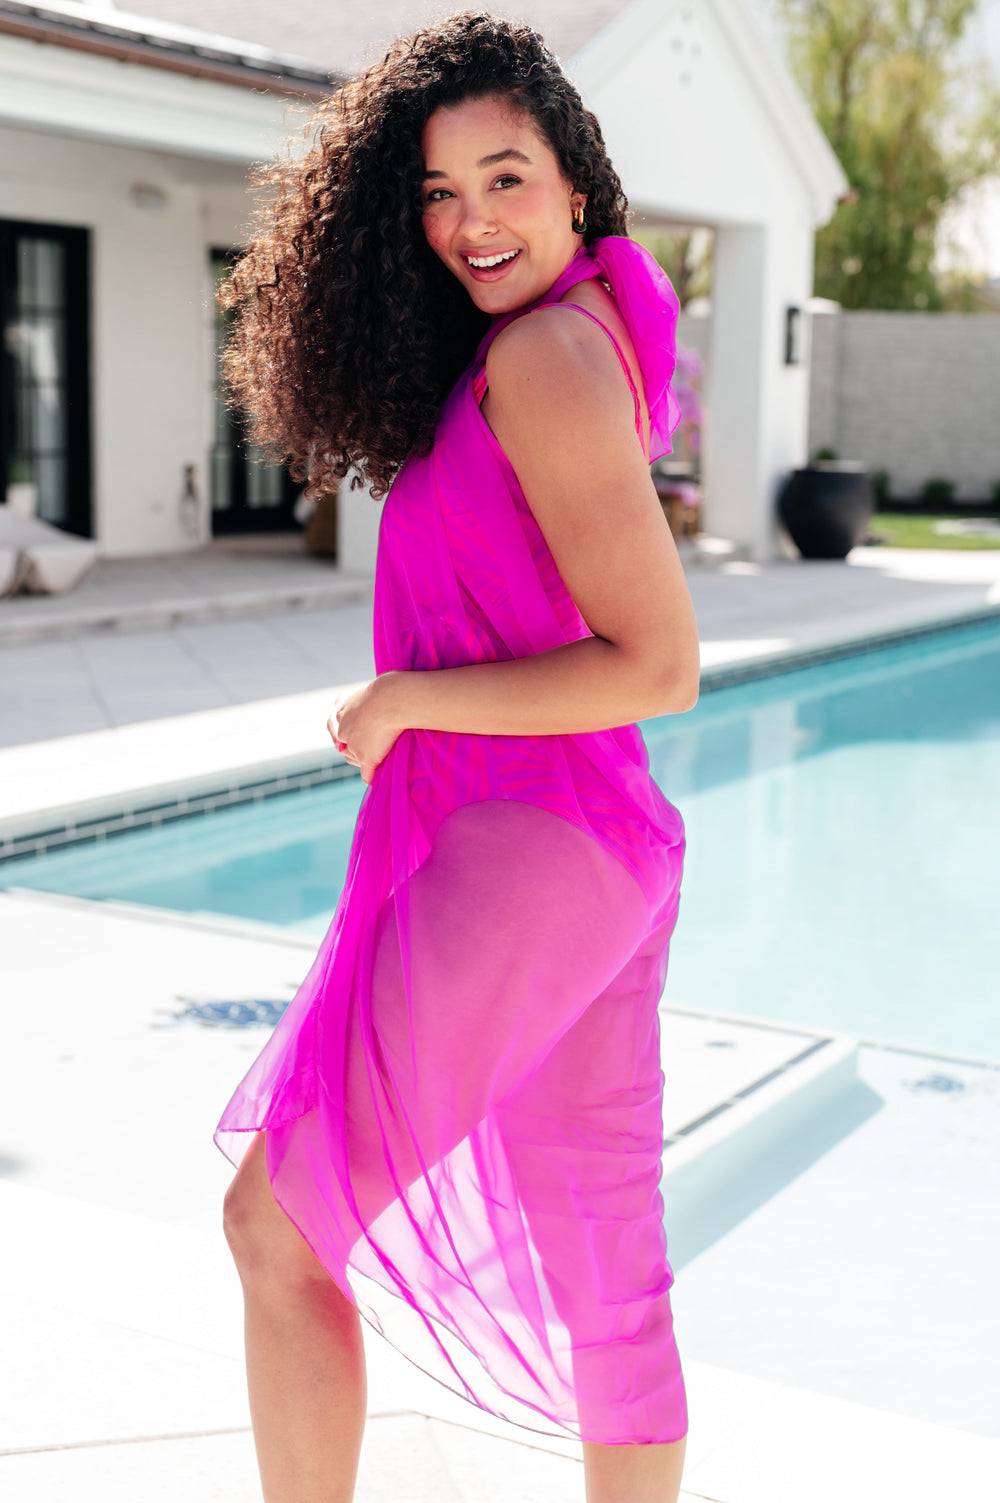 Wrapped In Summer Versatile Swim Cover in Pink-Swimwear-Inspired by Justeen-Women's Clothing Boutique in Chicago, Illinois